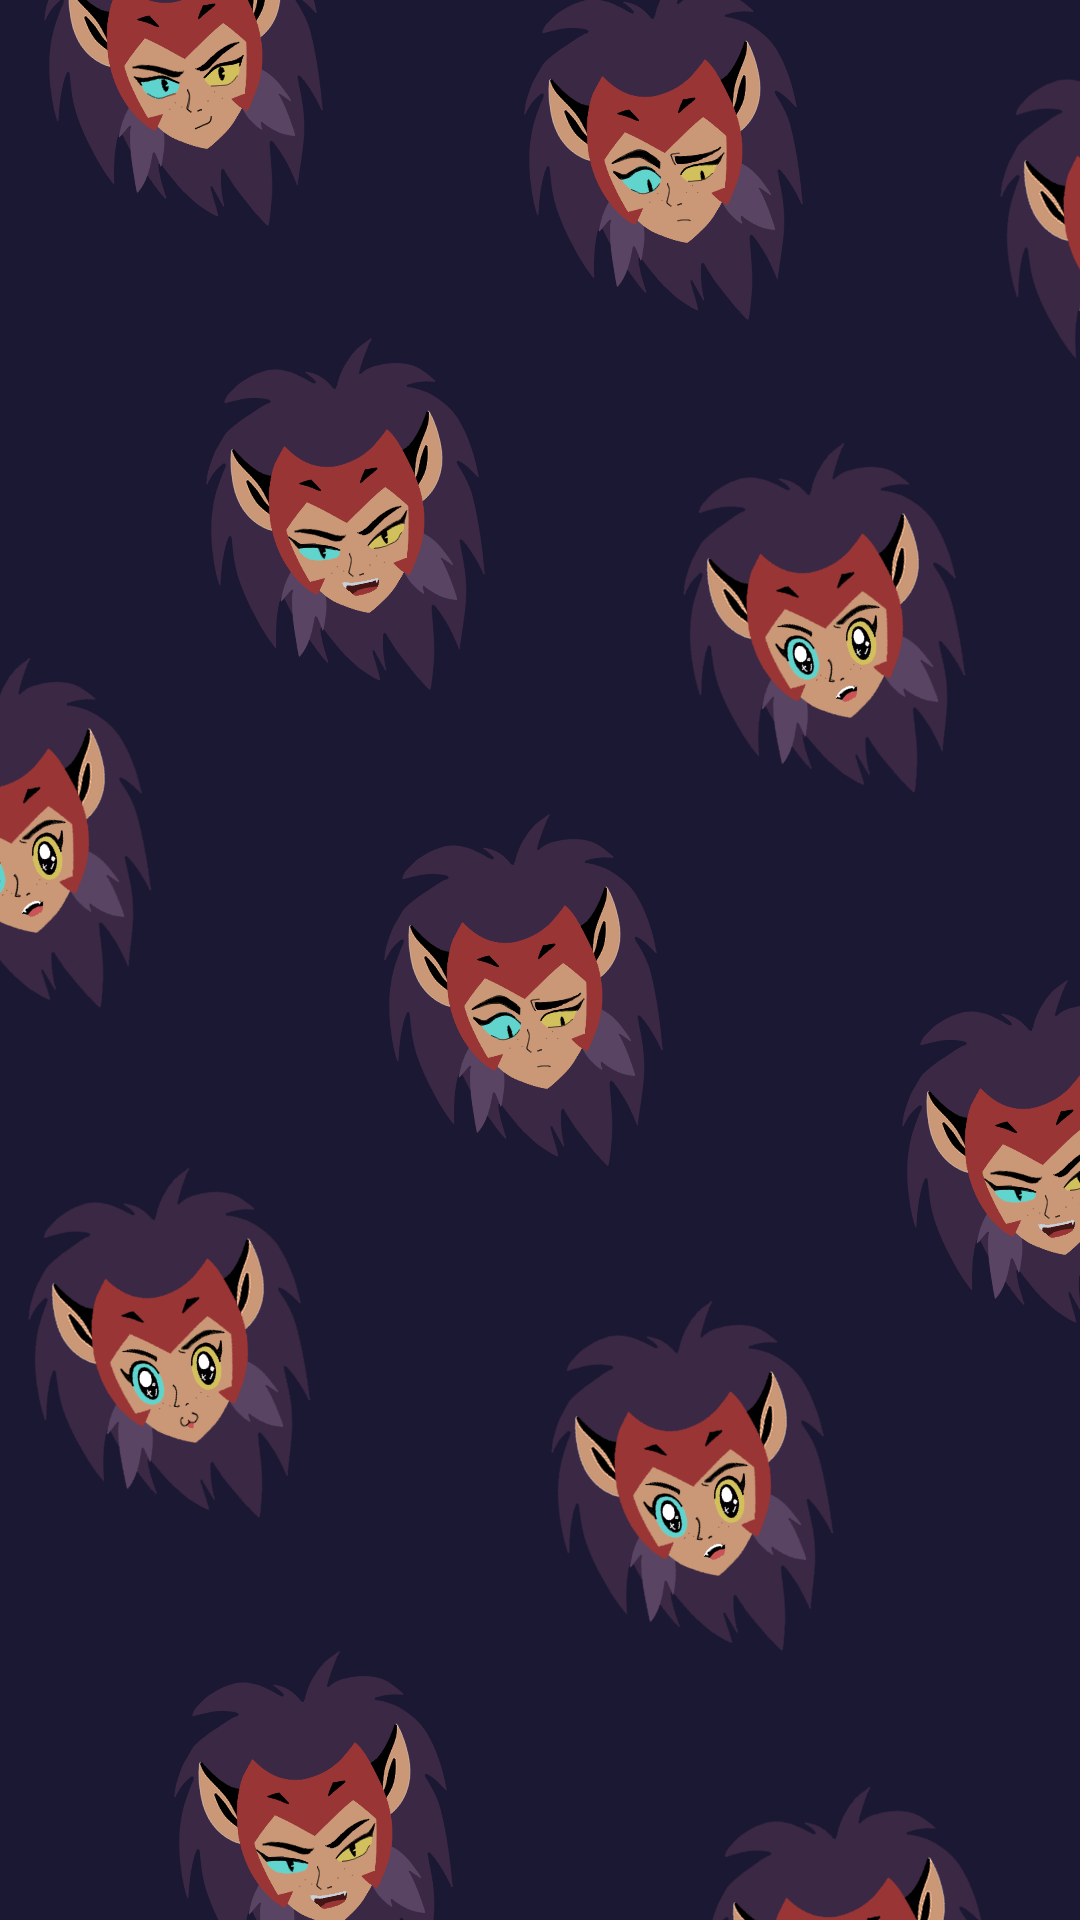 Made a cute little Catra mobile wallpaper (No spoilers)